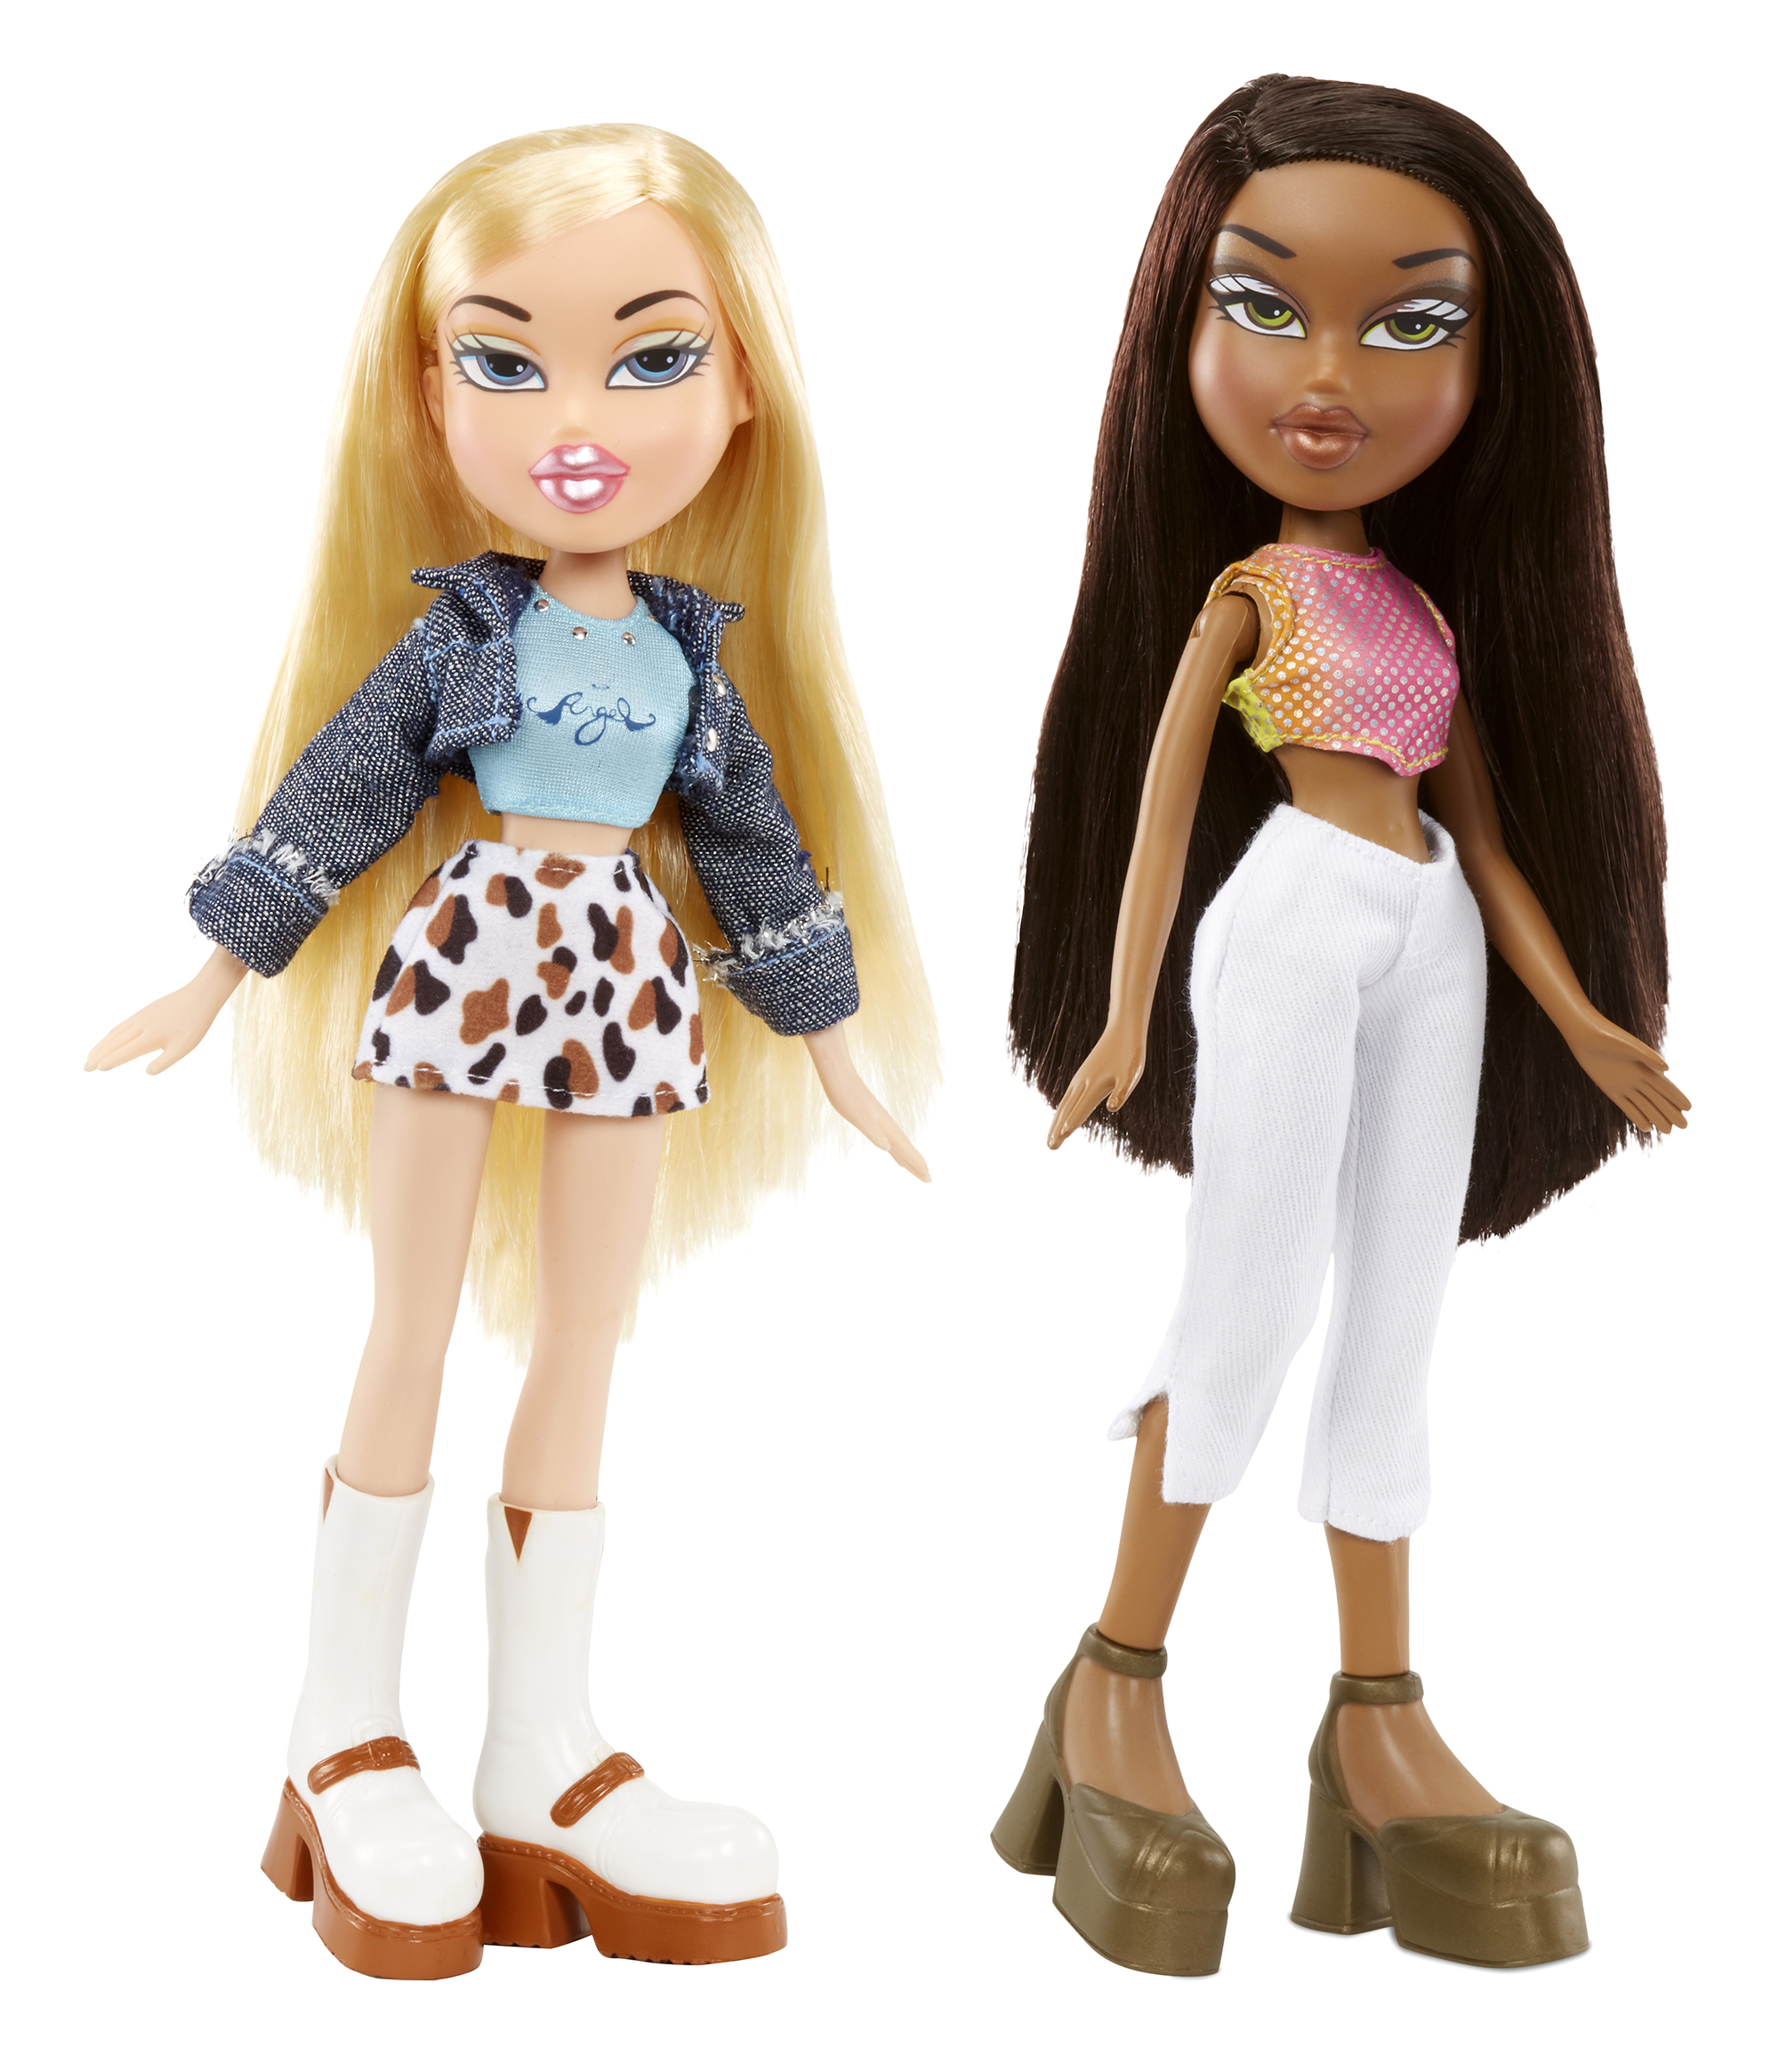 Bratz 2 pack sets of series 1 reproduction dolls - YouLoveIt.com